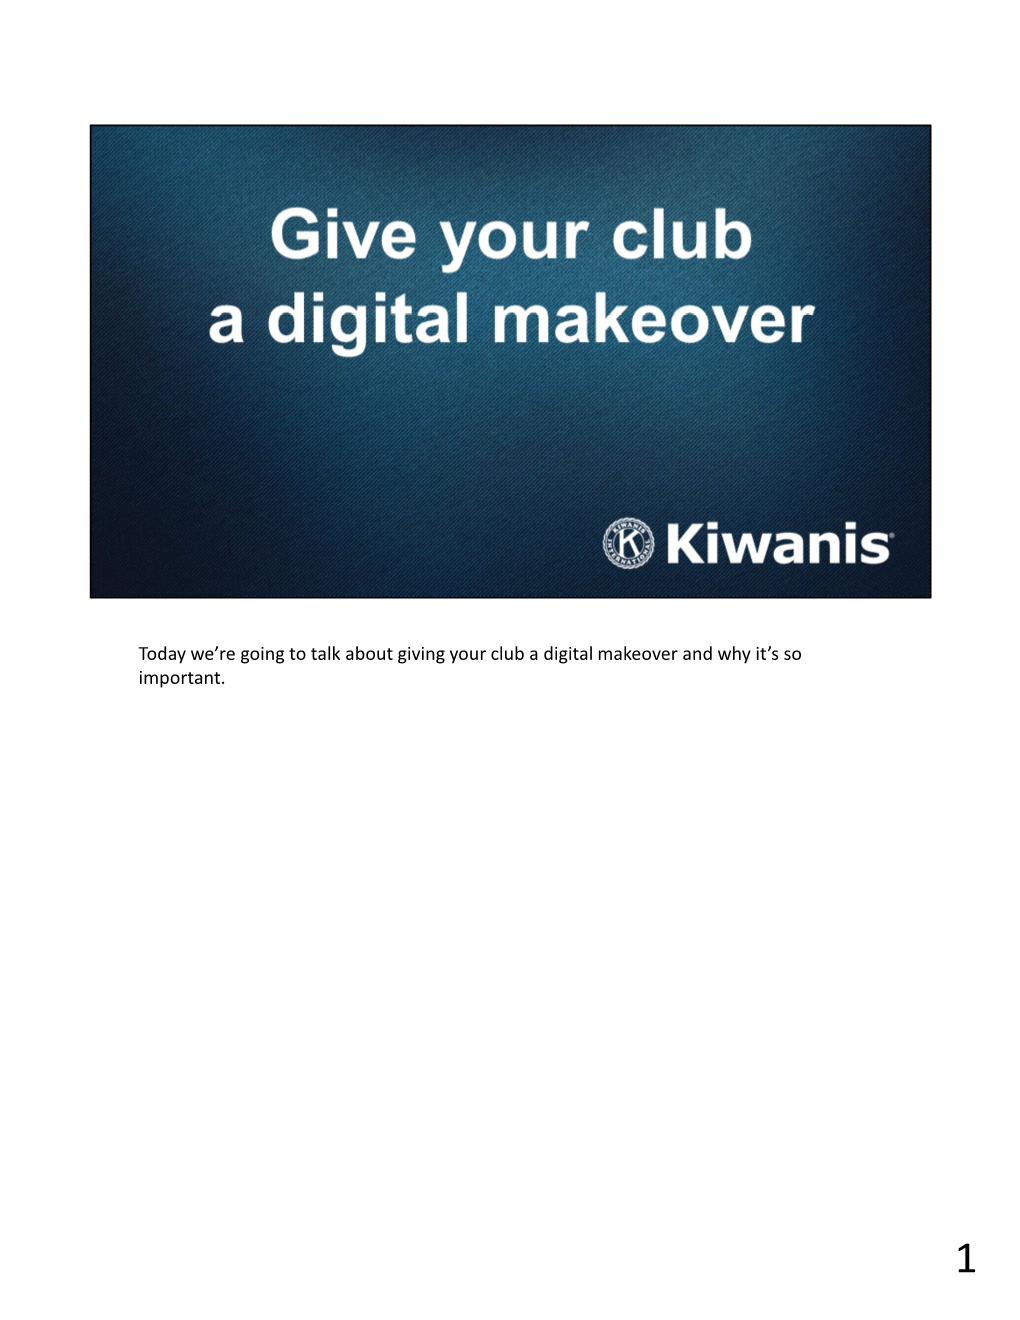 Today We're Going to Talk About Giving Your Club a Digital Makeover And